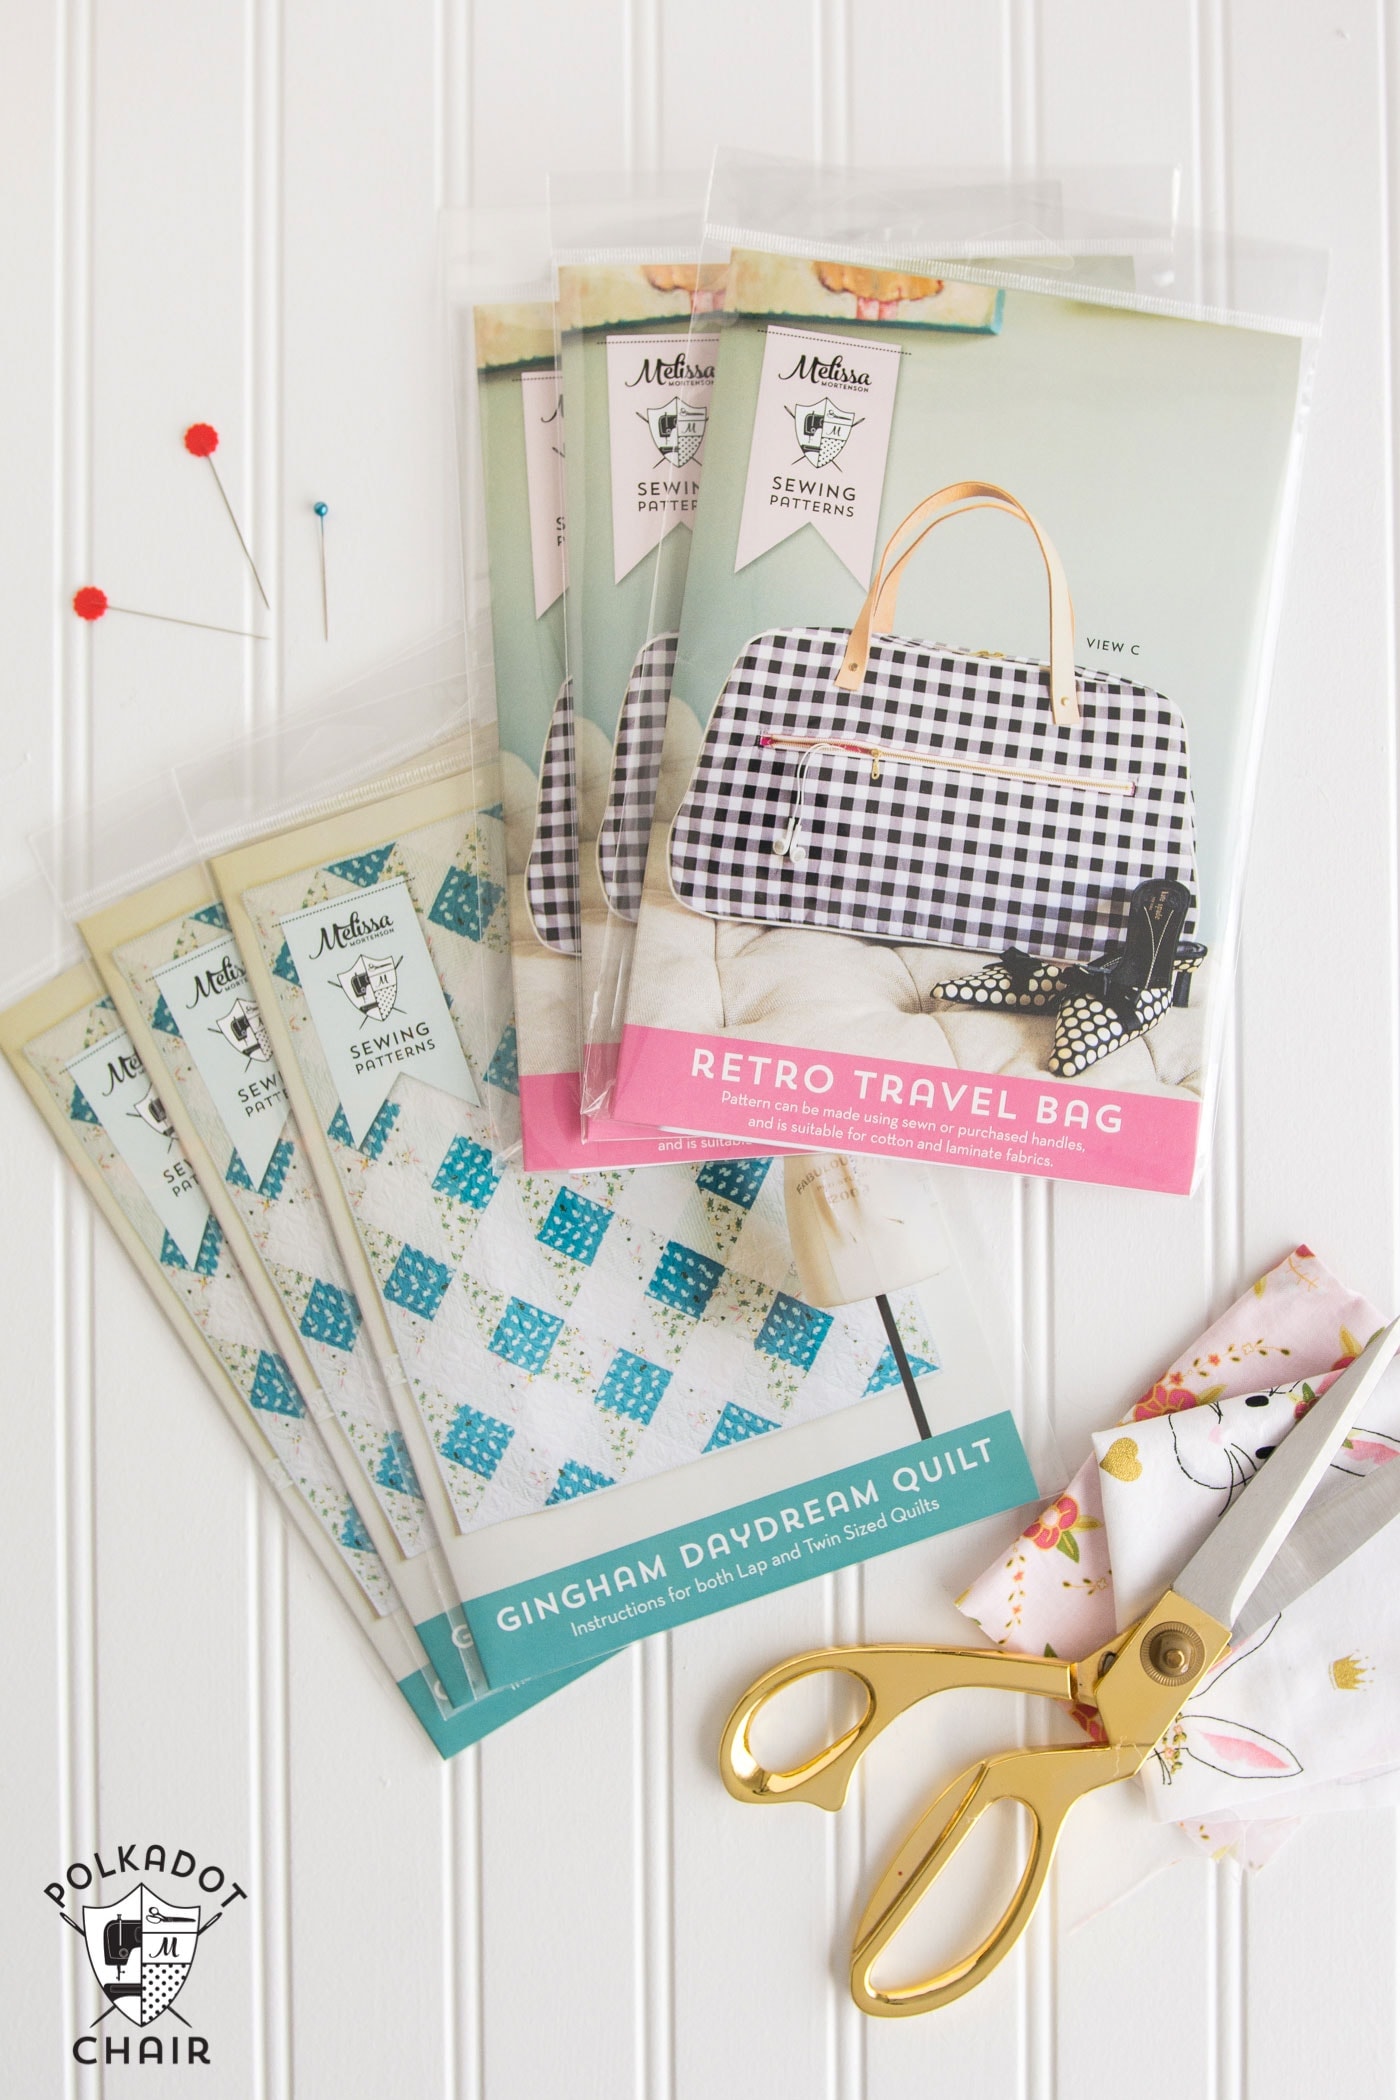 Printed copies of the Retro Travel Bag Sewing Pattern and the Gingham Daydream Quilt Pattern by Melissa Mortenson 